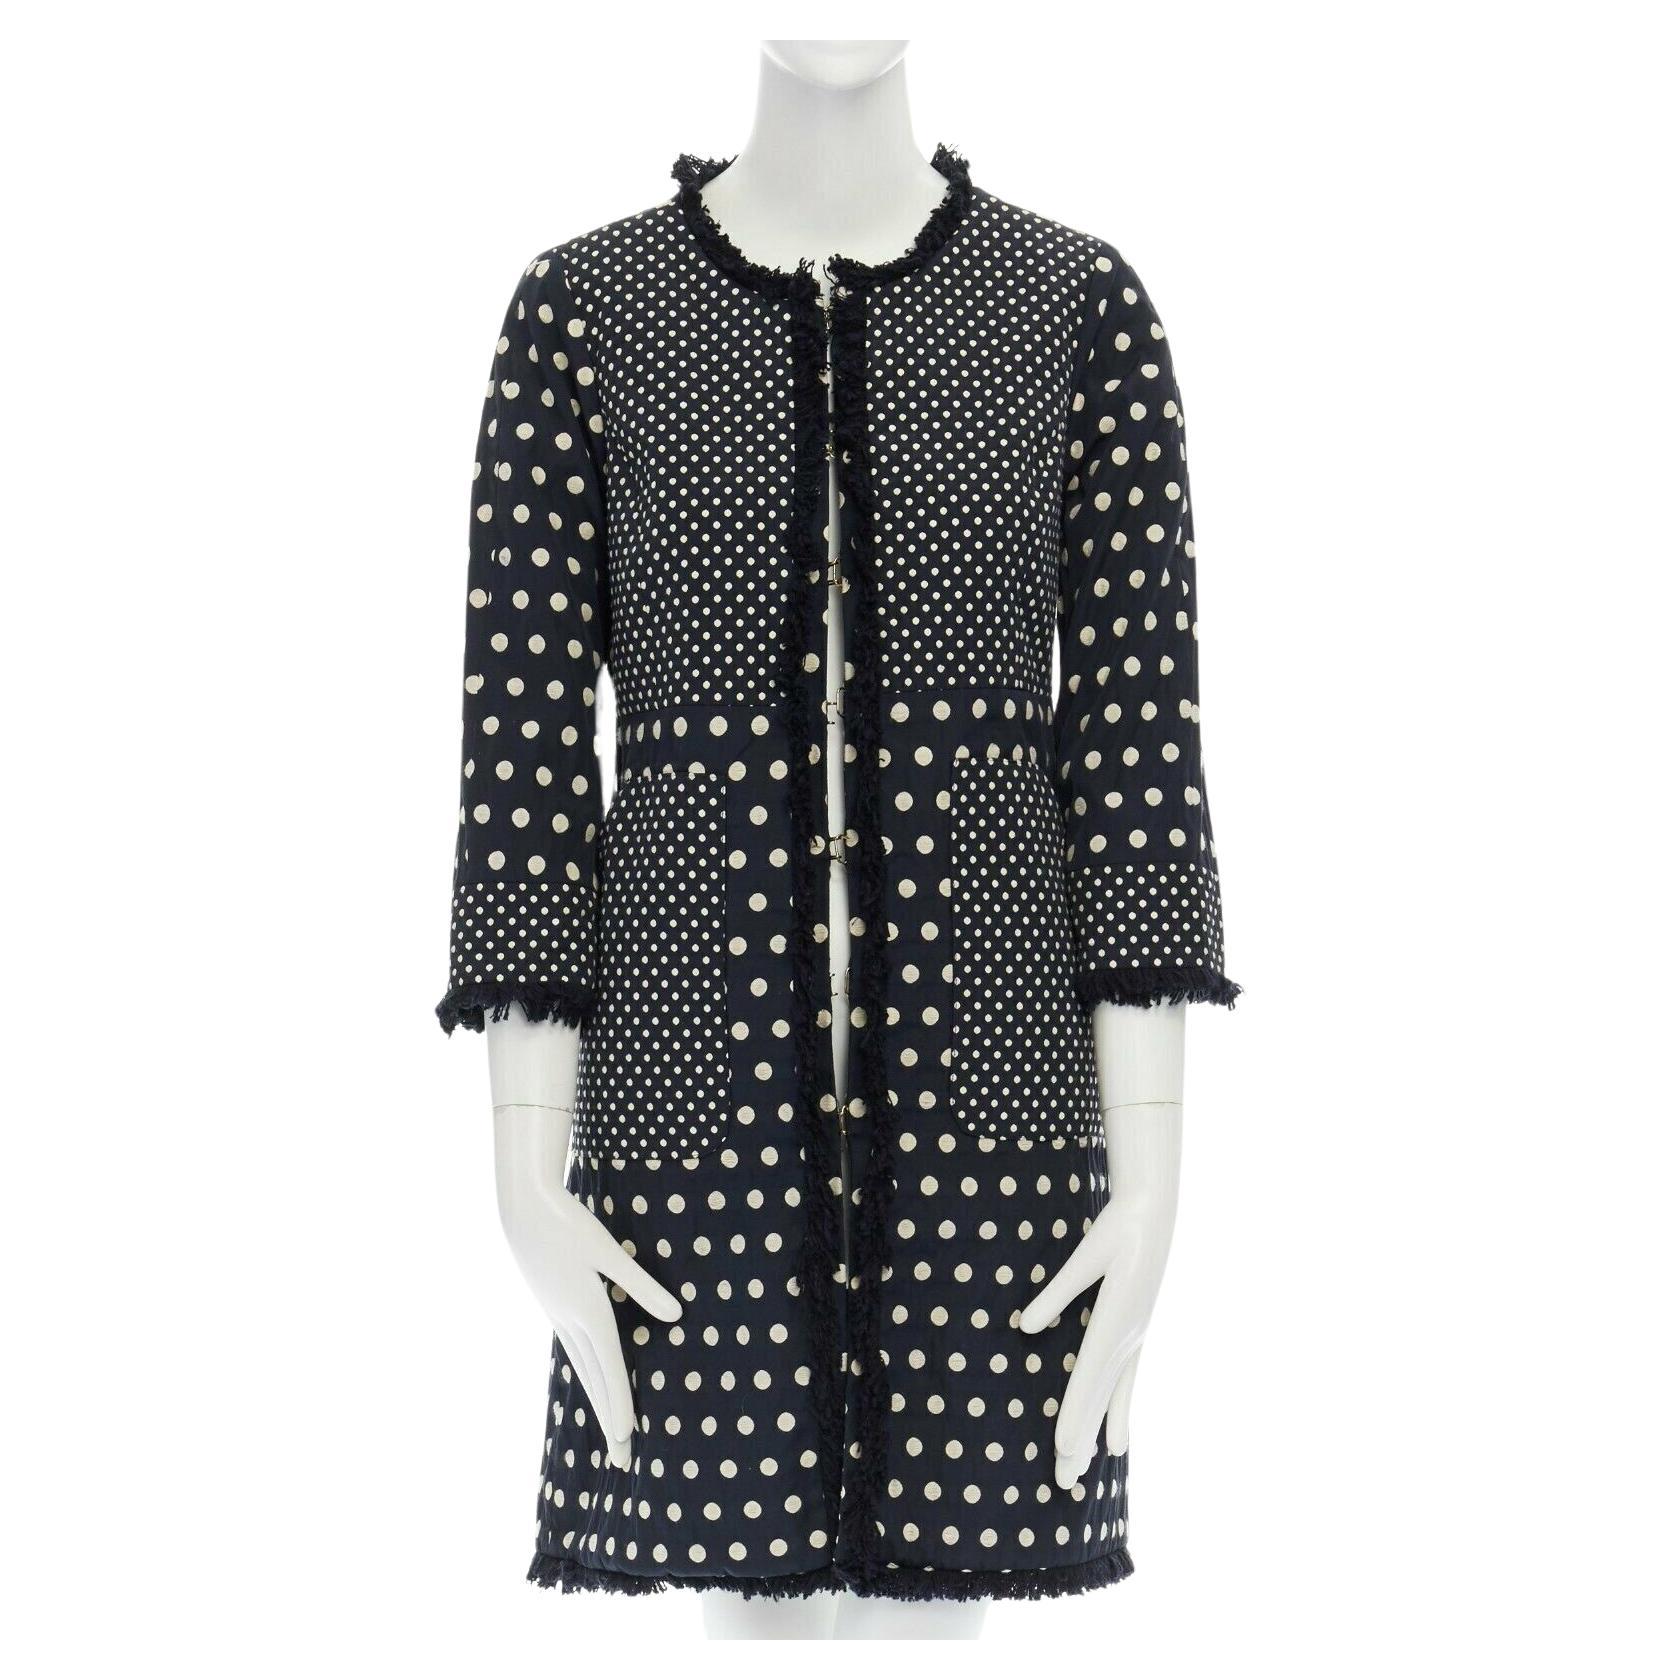 TORY BURCH navy blue white polka dot jacquard frayed trimmed coat US2 S For Sale